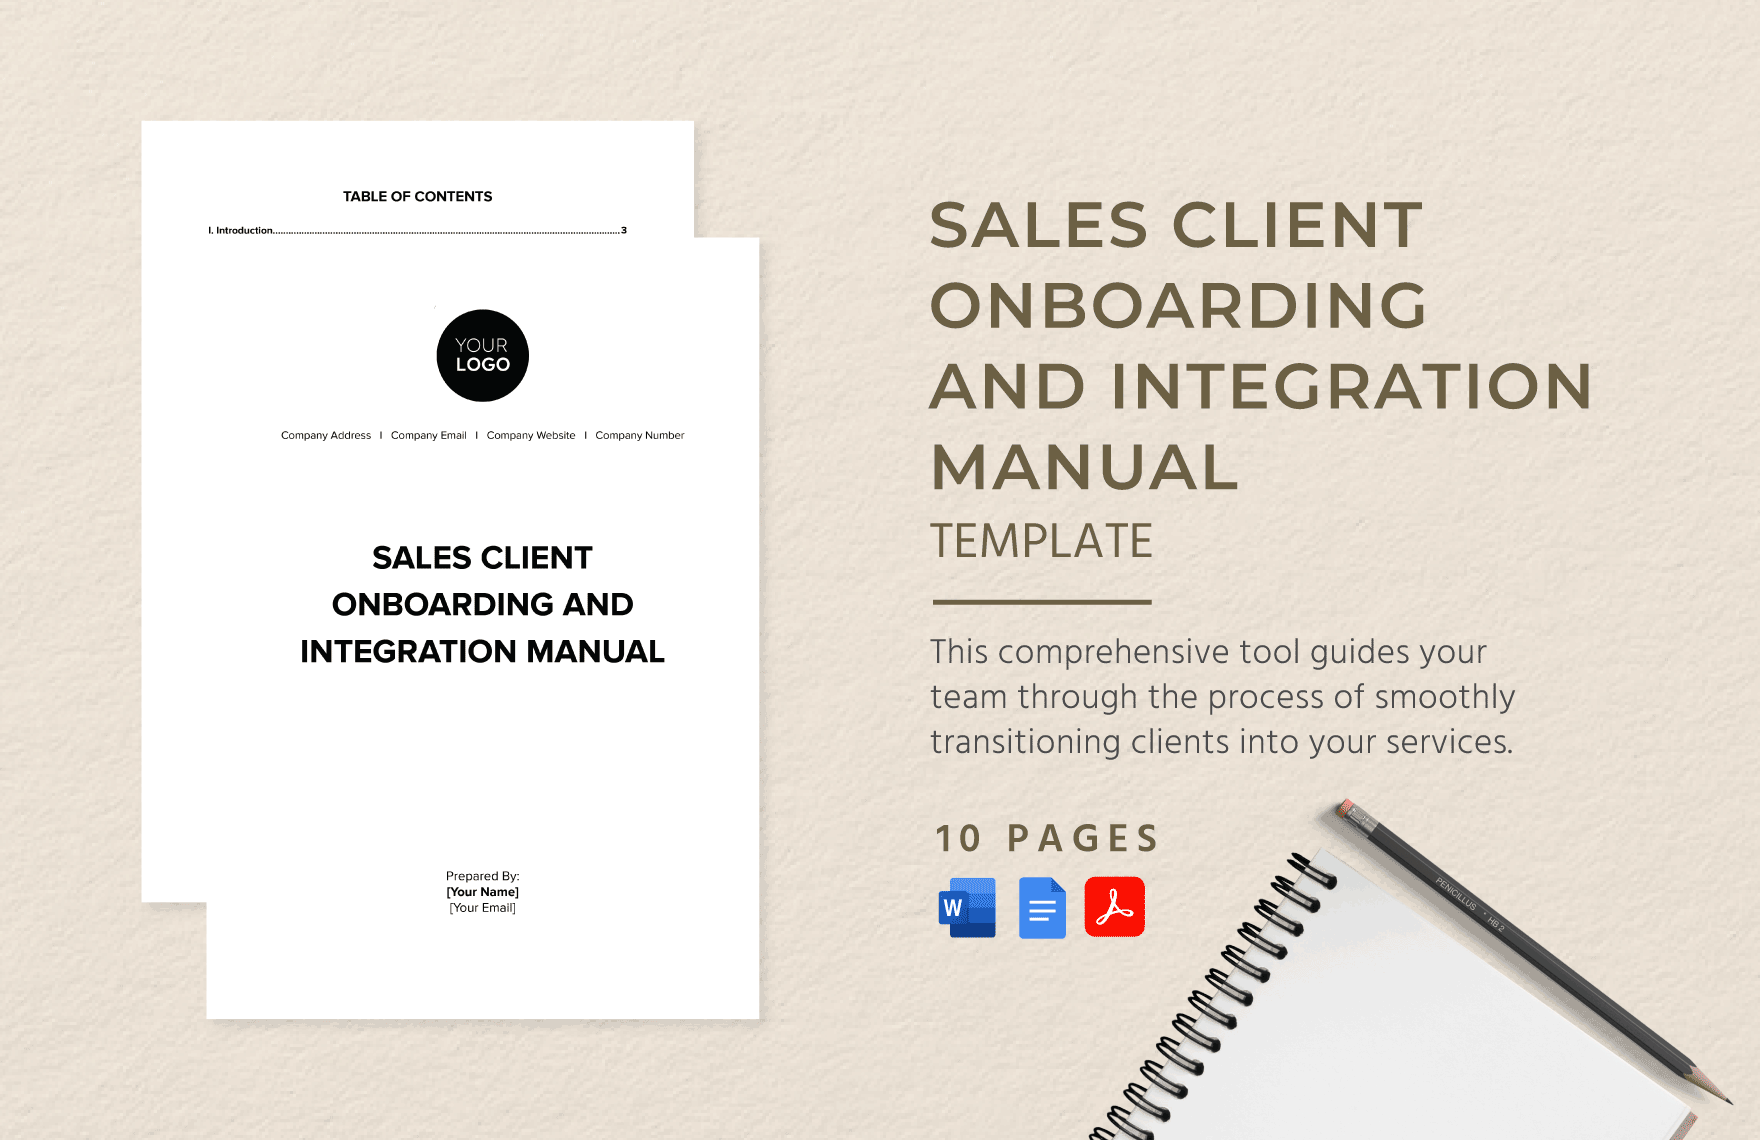 Sales Client Onboarding and Integration Manual Template in Word, Google Docs, PDF